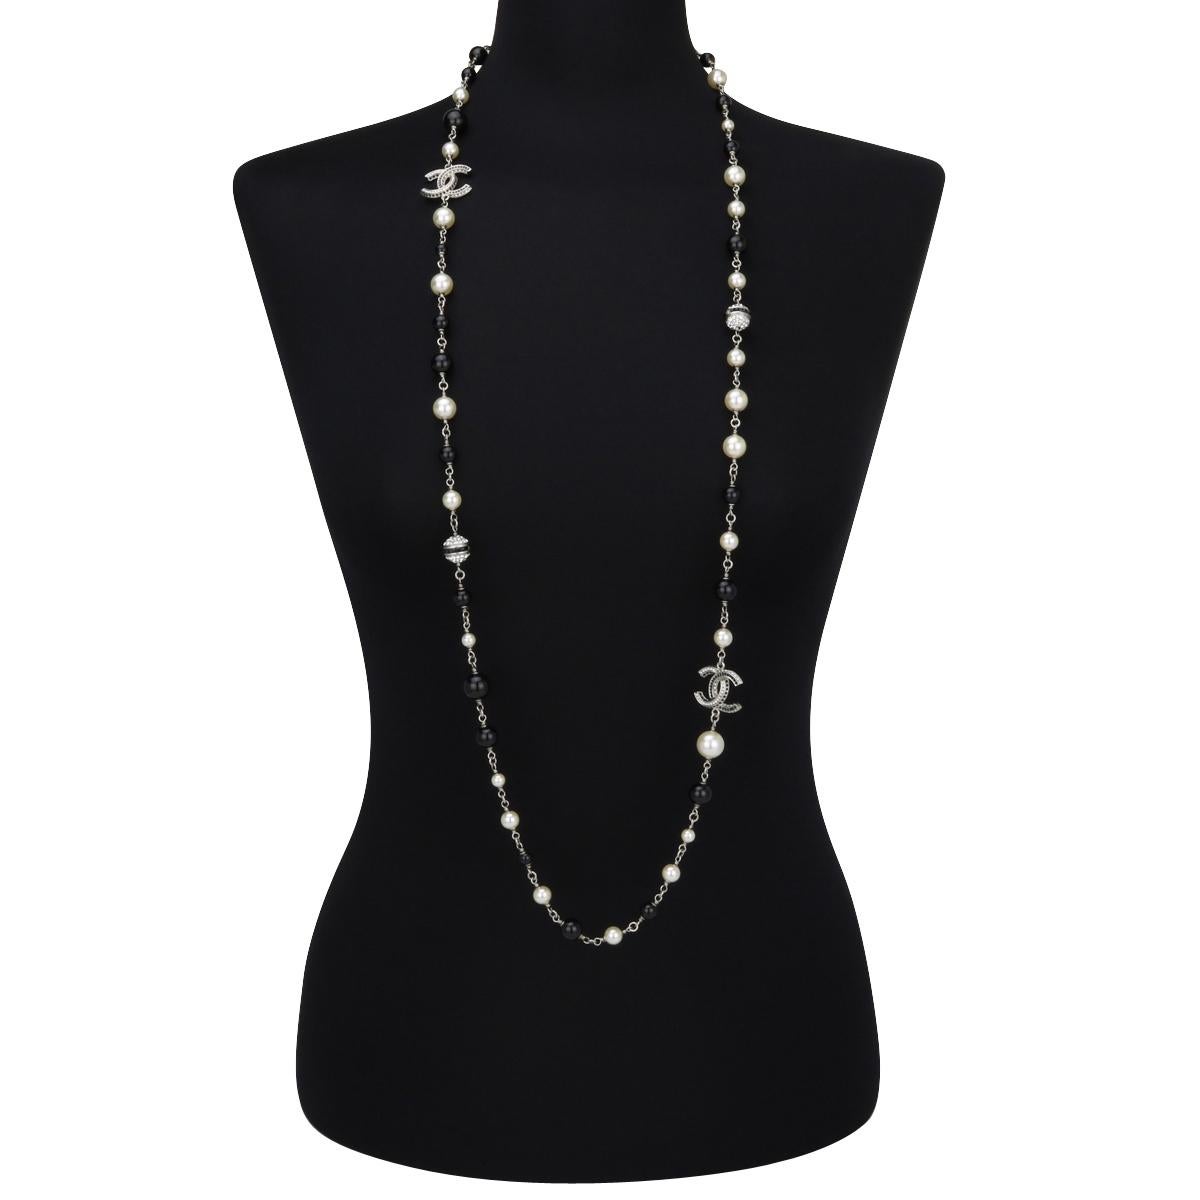 Authentic CHANEL CC Black and White Faux Pearl Crystal Silver Long Necklace 2018 (B18 V).

This stunning long necklace is in excellent condition.

It is made of exquisite various-sized baroque pearl beads, with large interlocking CCs pendants with